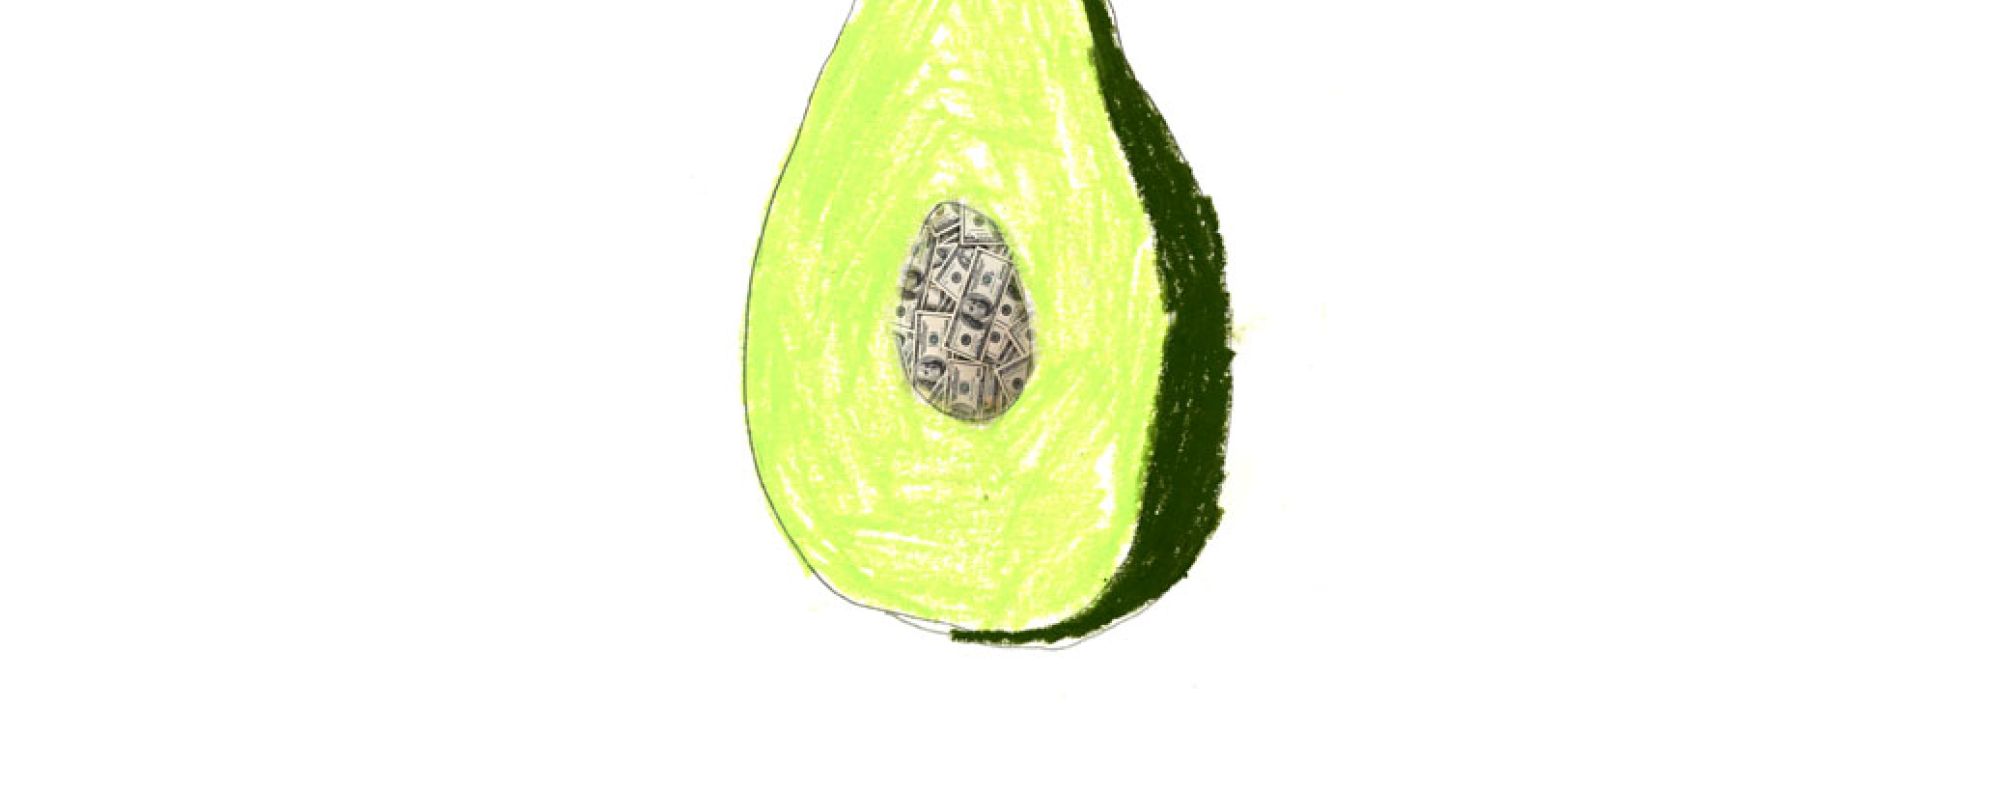 image of avocado with words "eat me"